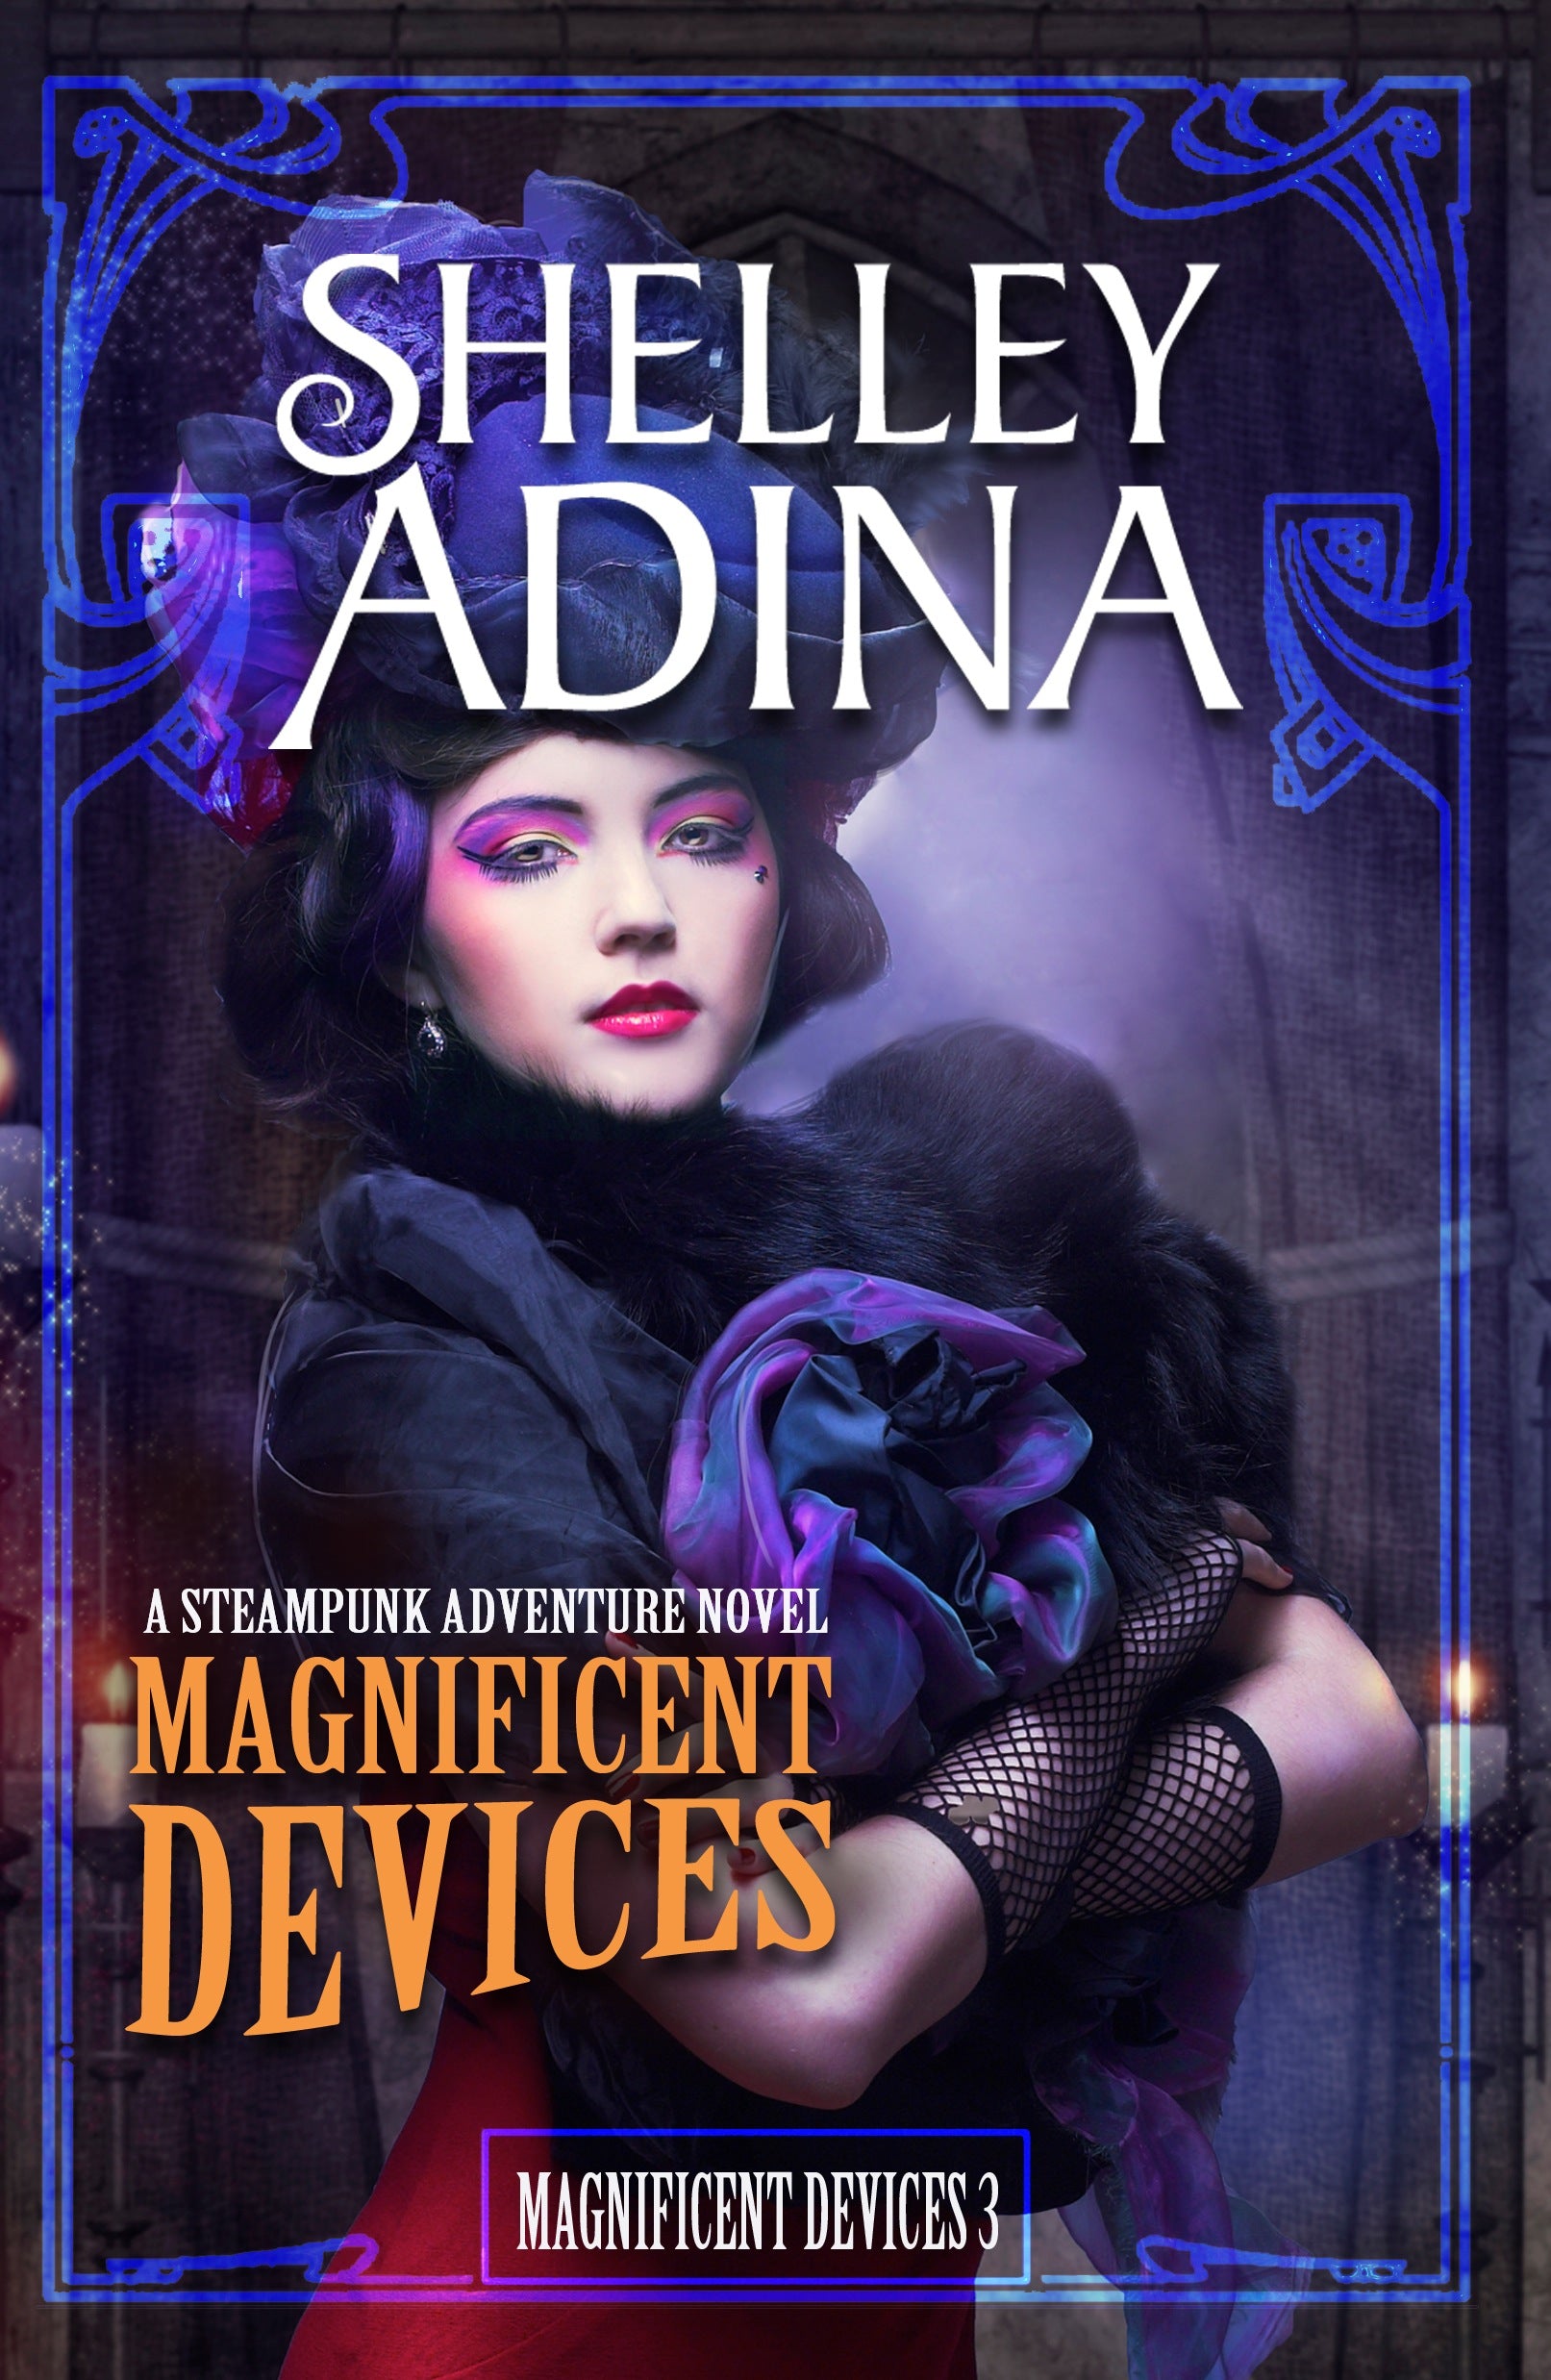 Magnificent Devices written by Shelley Adina